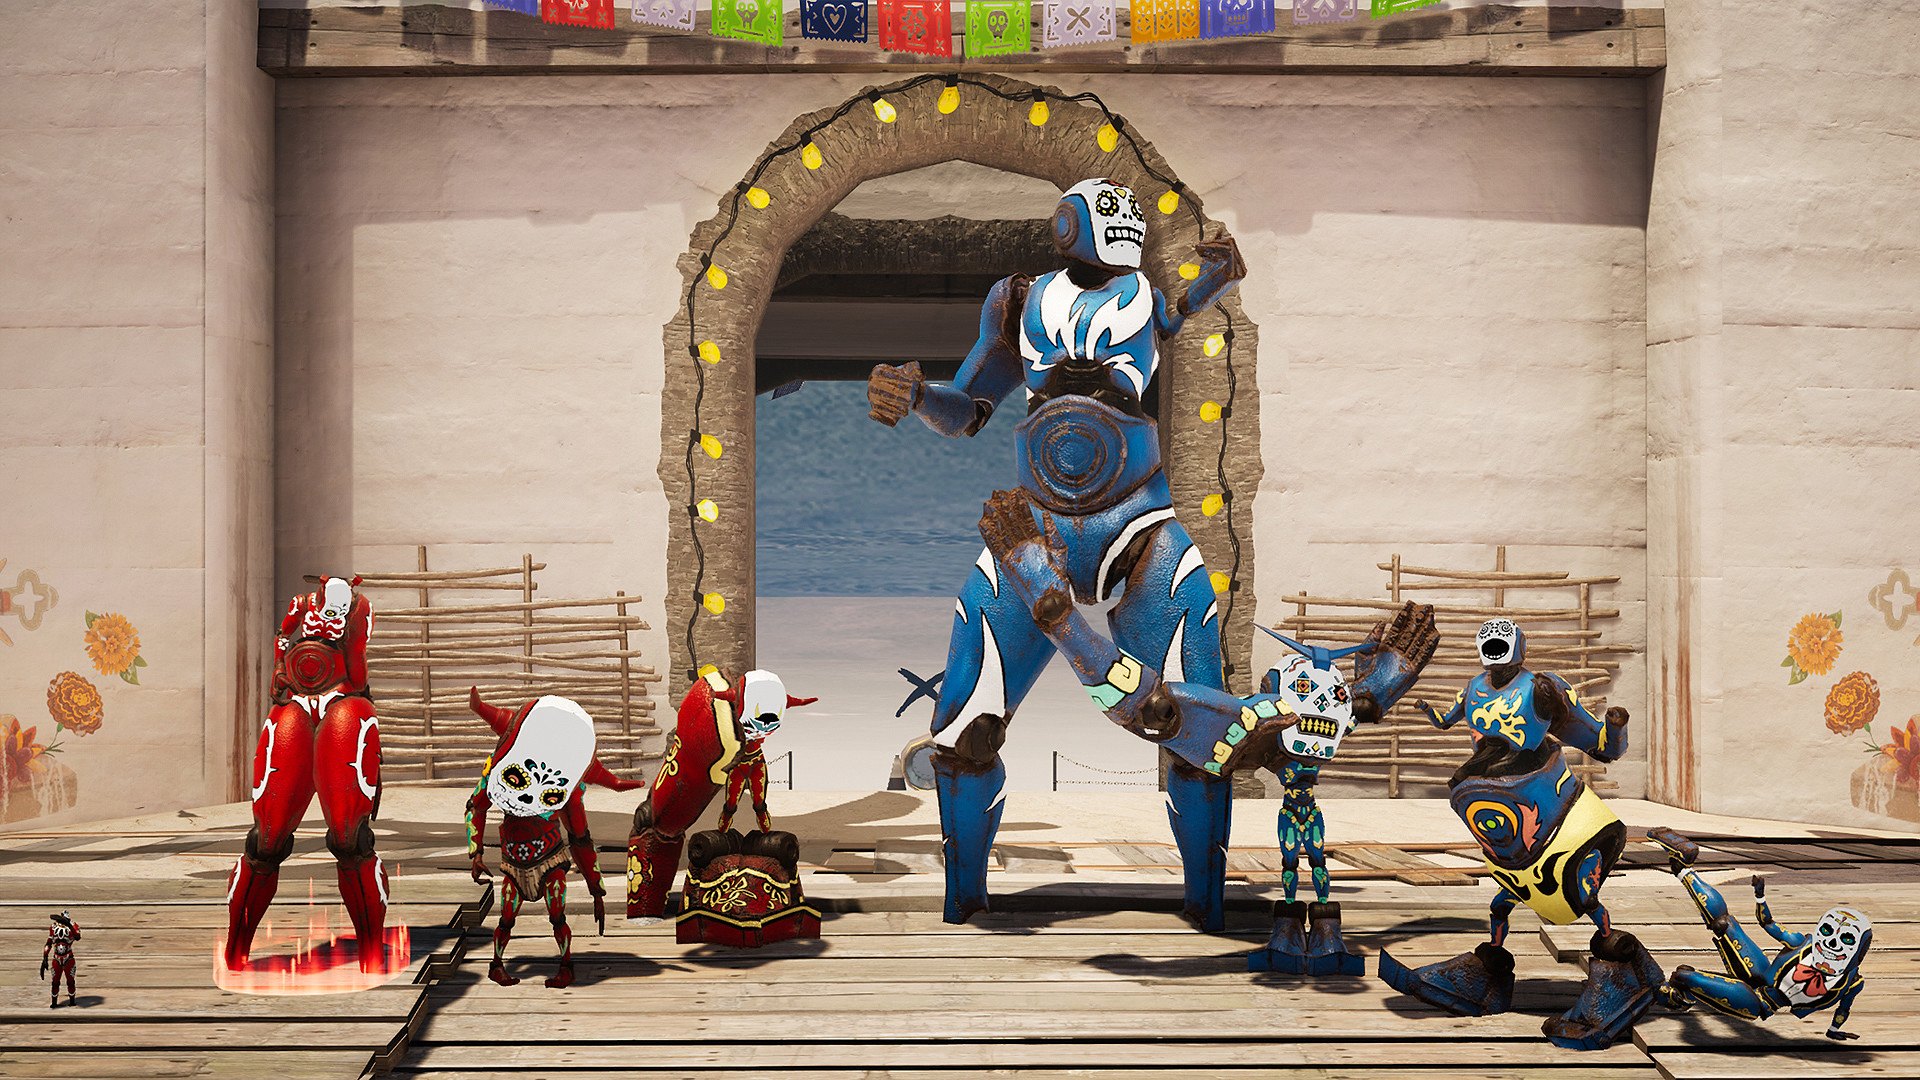 Morphies Law: Remorphed Steam CD Key